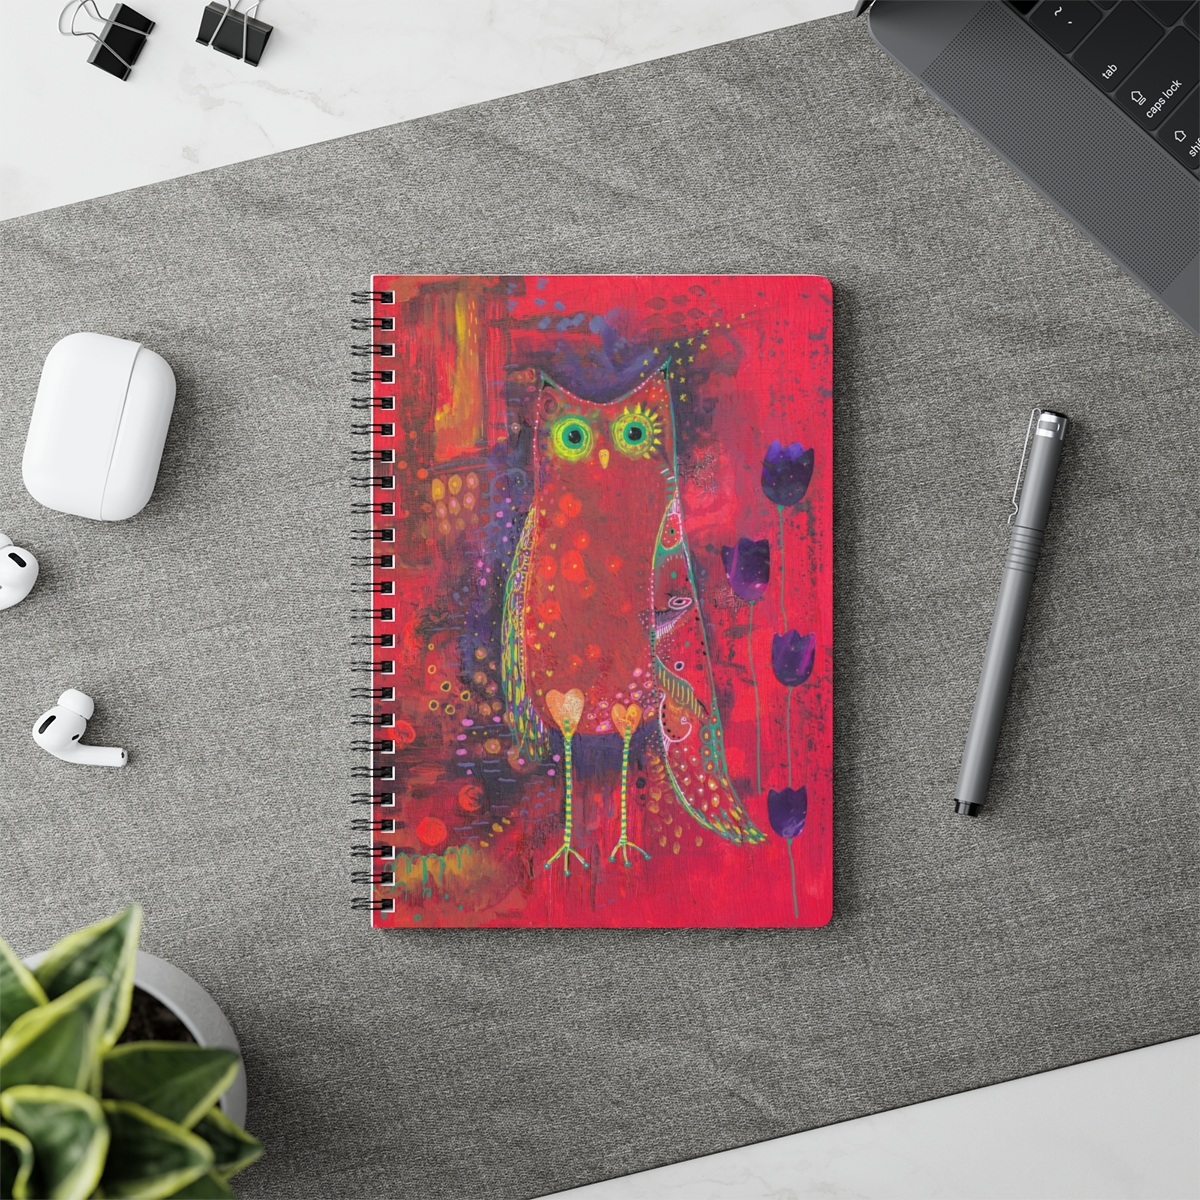 Owl notebook in context - Ruby Owl is a whimsical owl painted in hues of red and purple with yellow and green pattern detail. Purple tulips grow beside her.